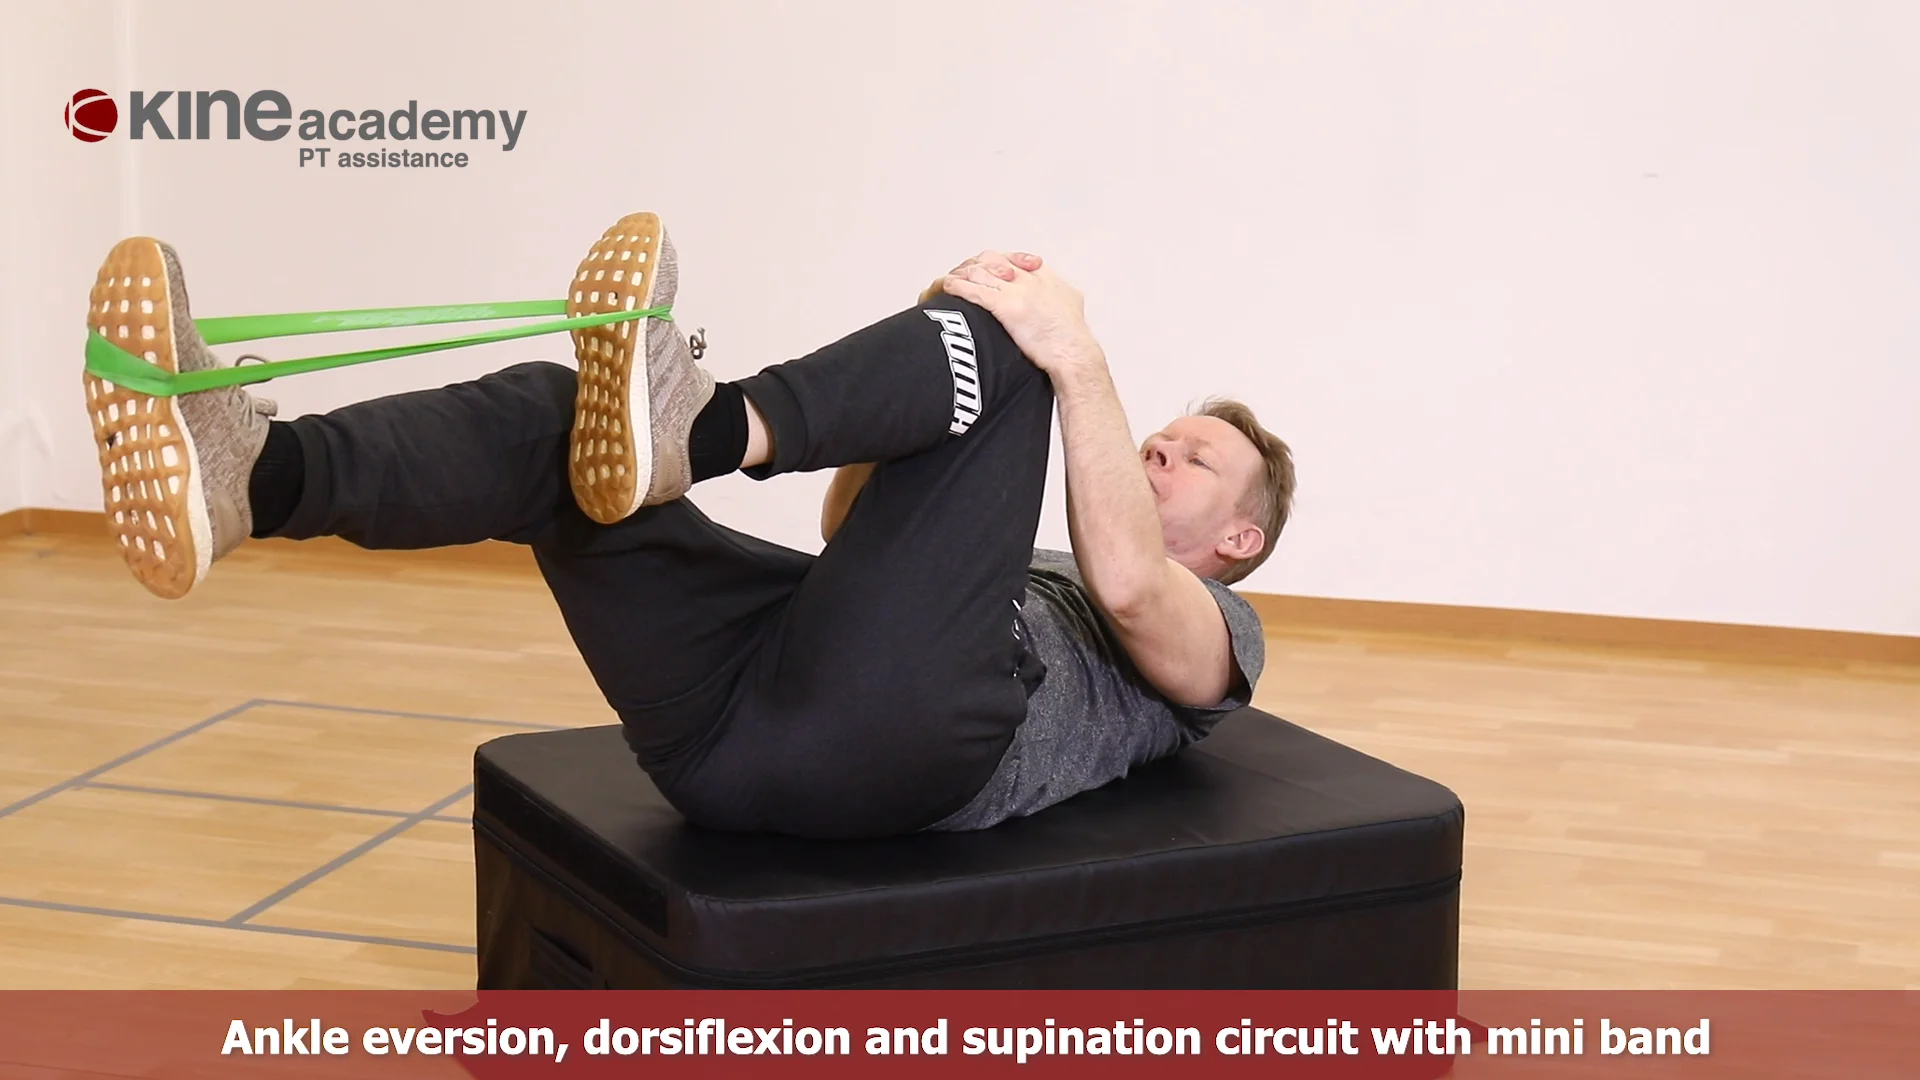 Ankle eversion, dorsiflexion and supination circuit with mini band. on Vimeo